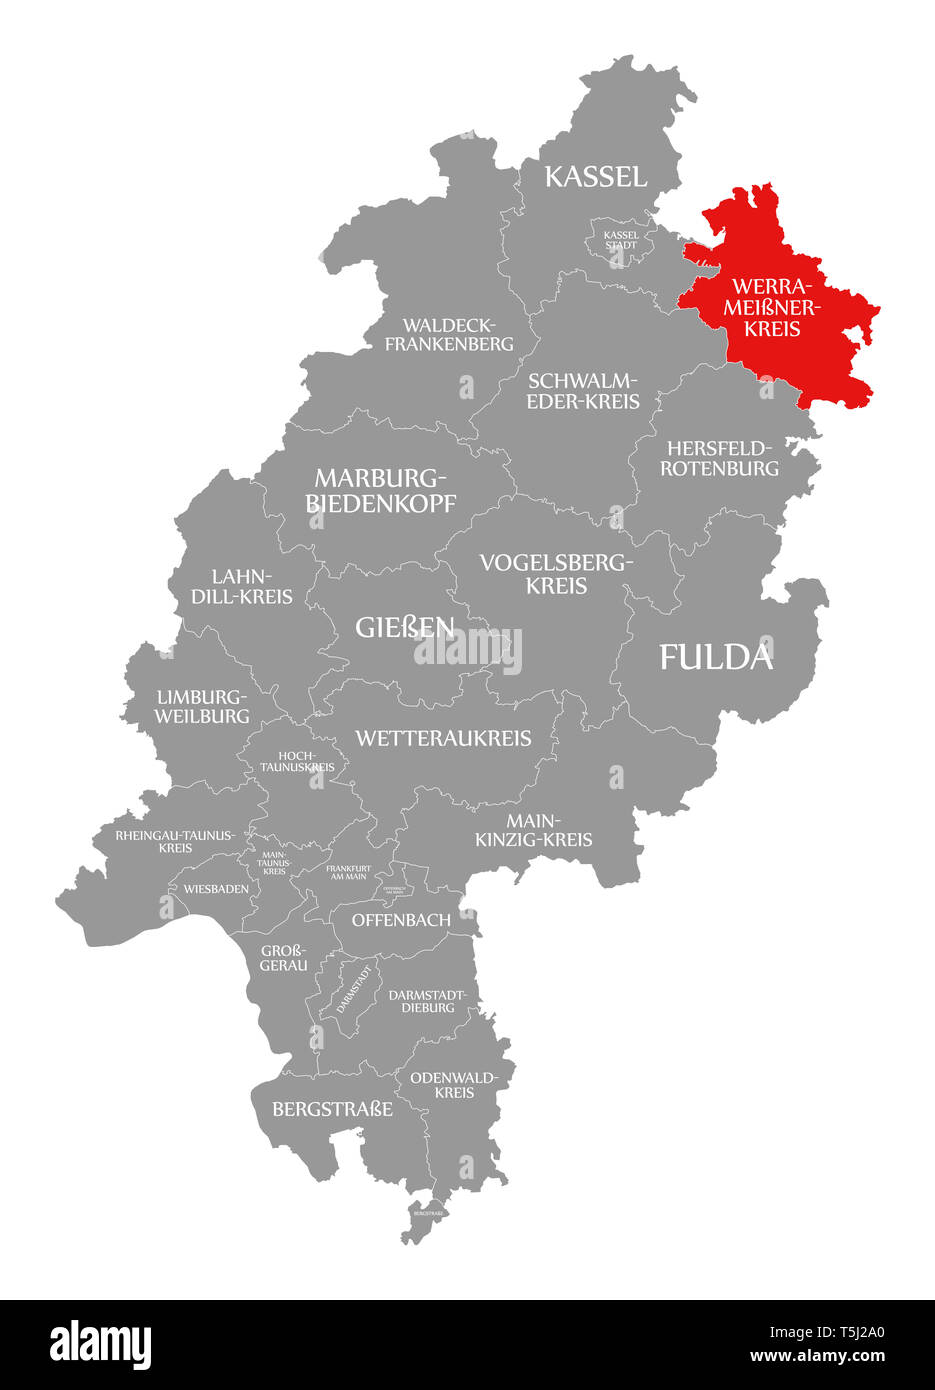 Werra-Meissner-Kreis county red highlighted in map of Hessen Germany Stock Photo